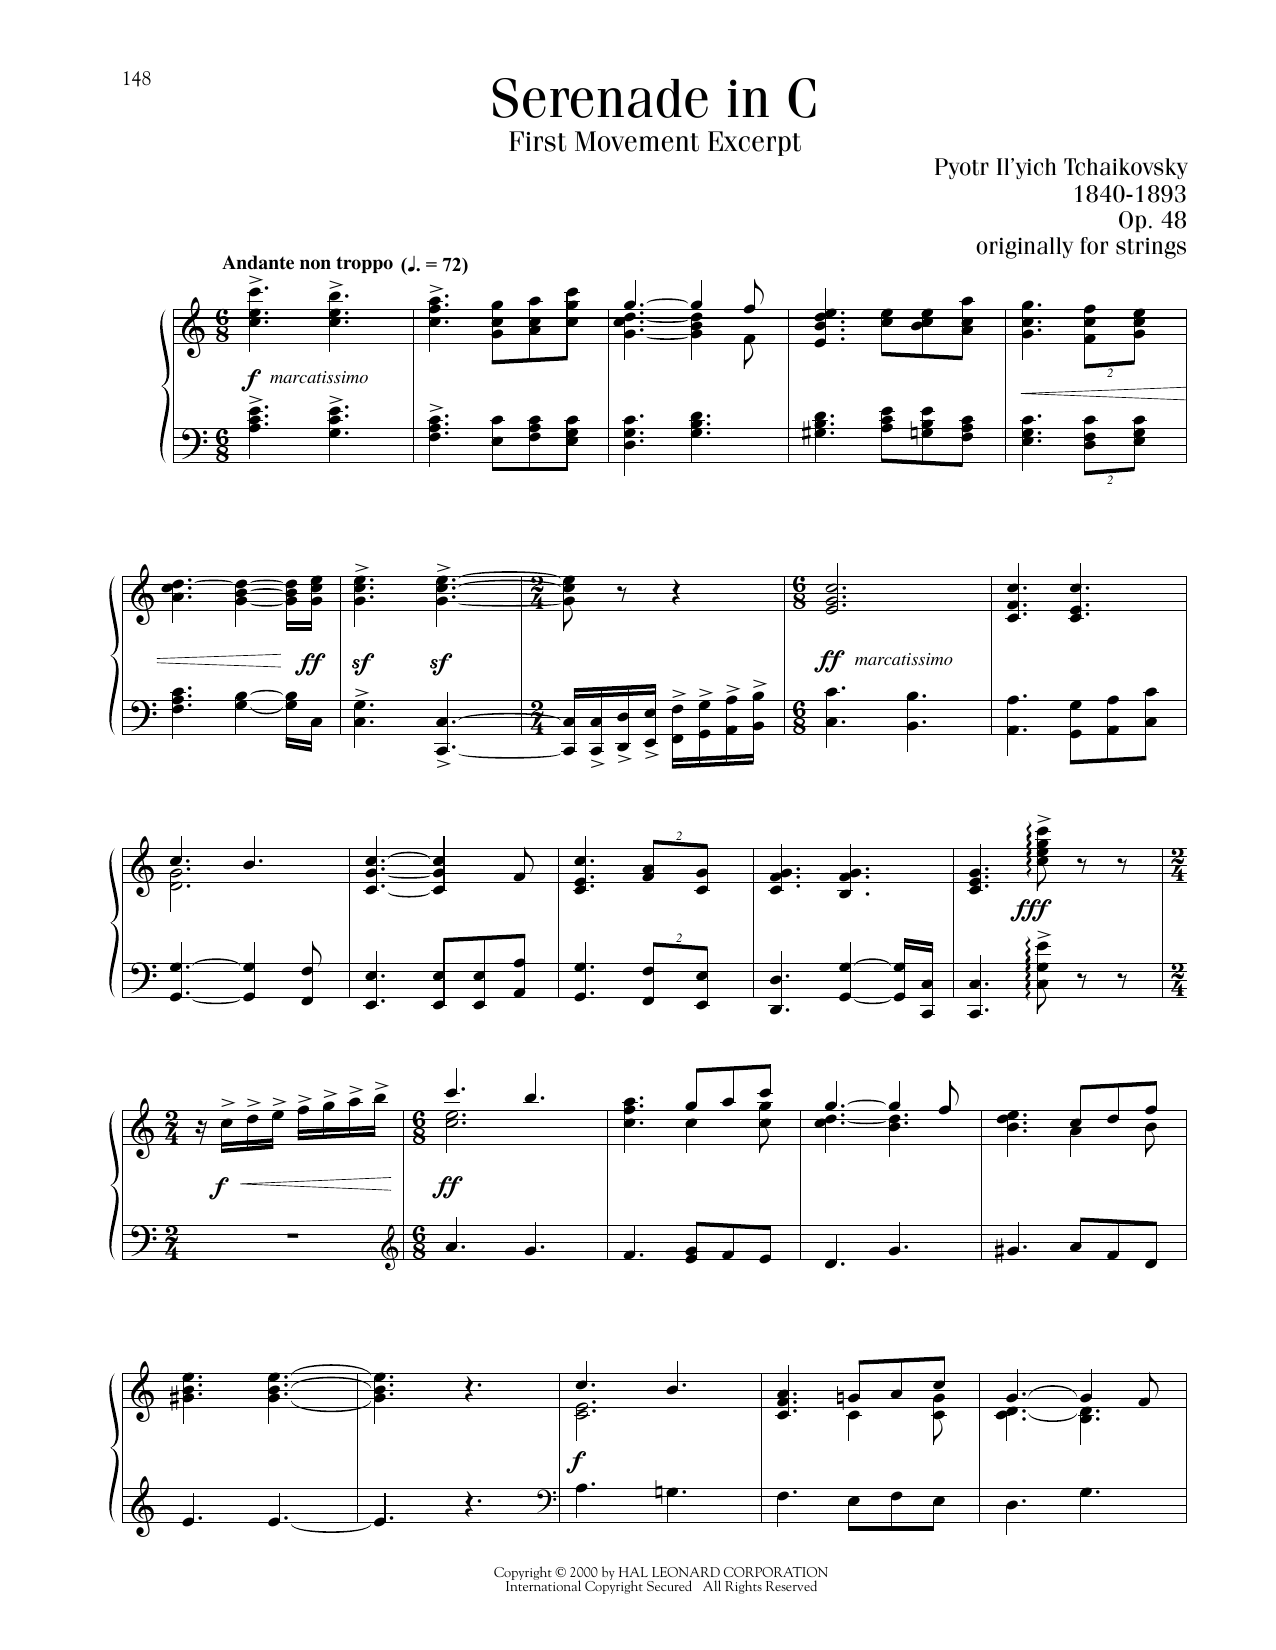 Pyotr Il'yich Tchaikovsky Serenade In C, Op. 48, First Movement Excerpt sheet music notes printable PDF score